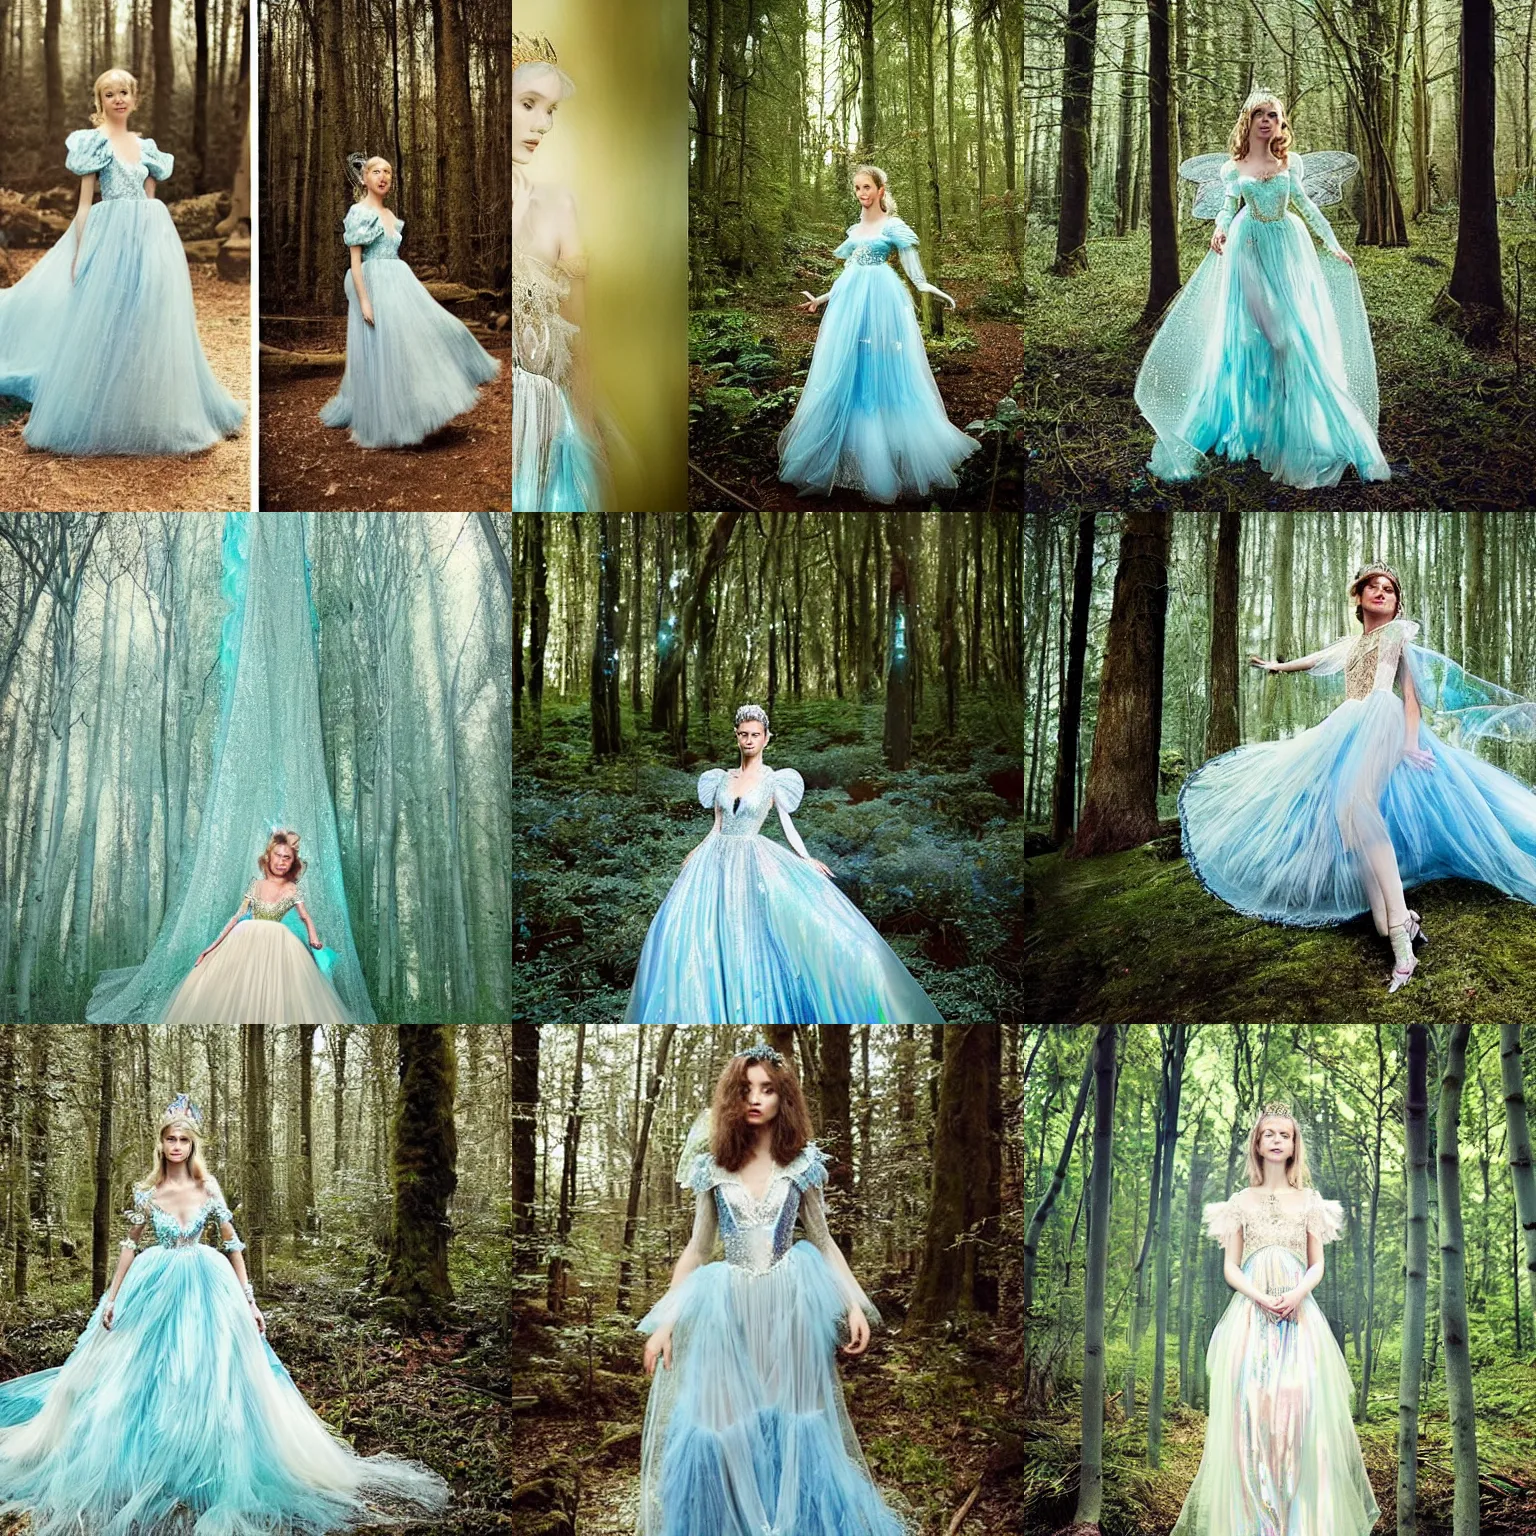 Prompt: A beautiful princess wearing a Fairy dress with cream lace bodice with sleeves of sheer pale blue sequins photographed full bodied in a magical iridescent forest, photographed in the style of Mario Testino